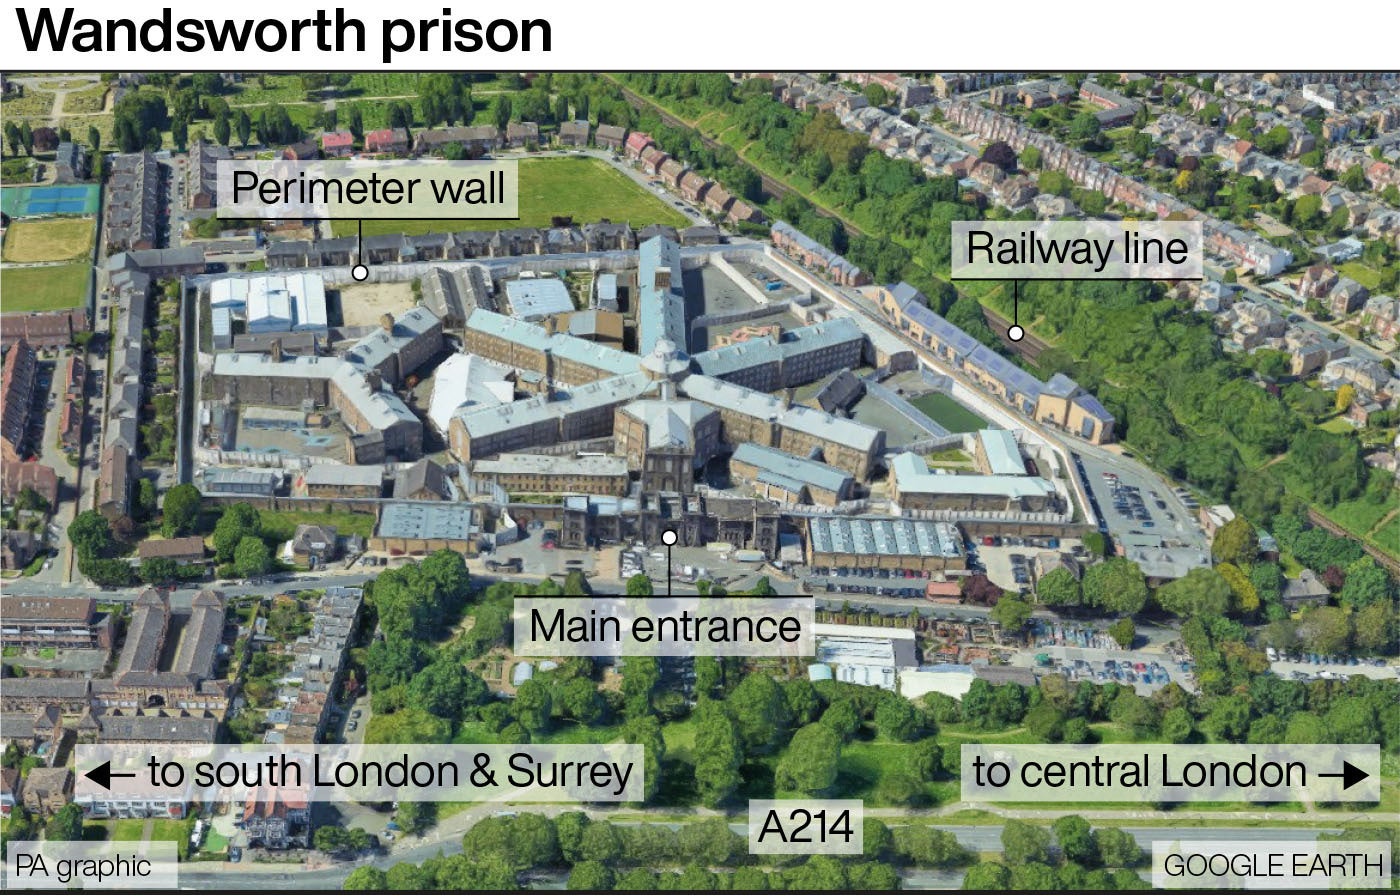 A review found standards at HMP Wandsworth to be of a ‘serious concern’